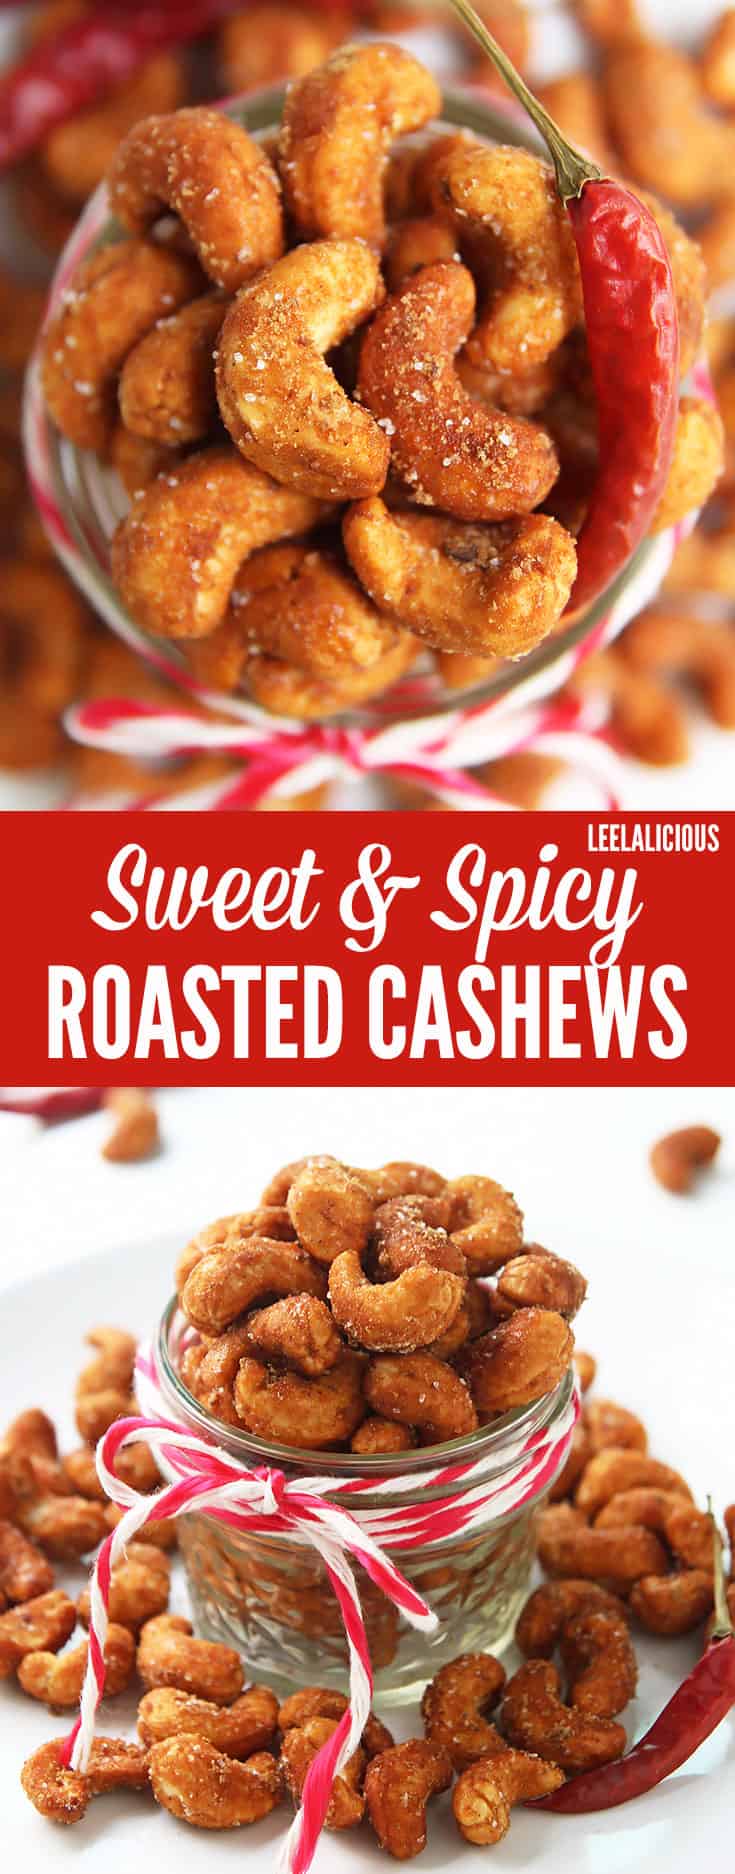 Sweet and Spicy Roasted Cashews are a delicious, wholesome snack for cooler weather. Honey and chili powder give the yummy cashews their sweet heat and crunchy coating.